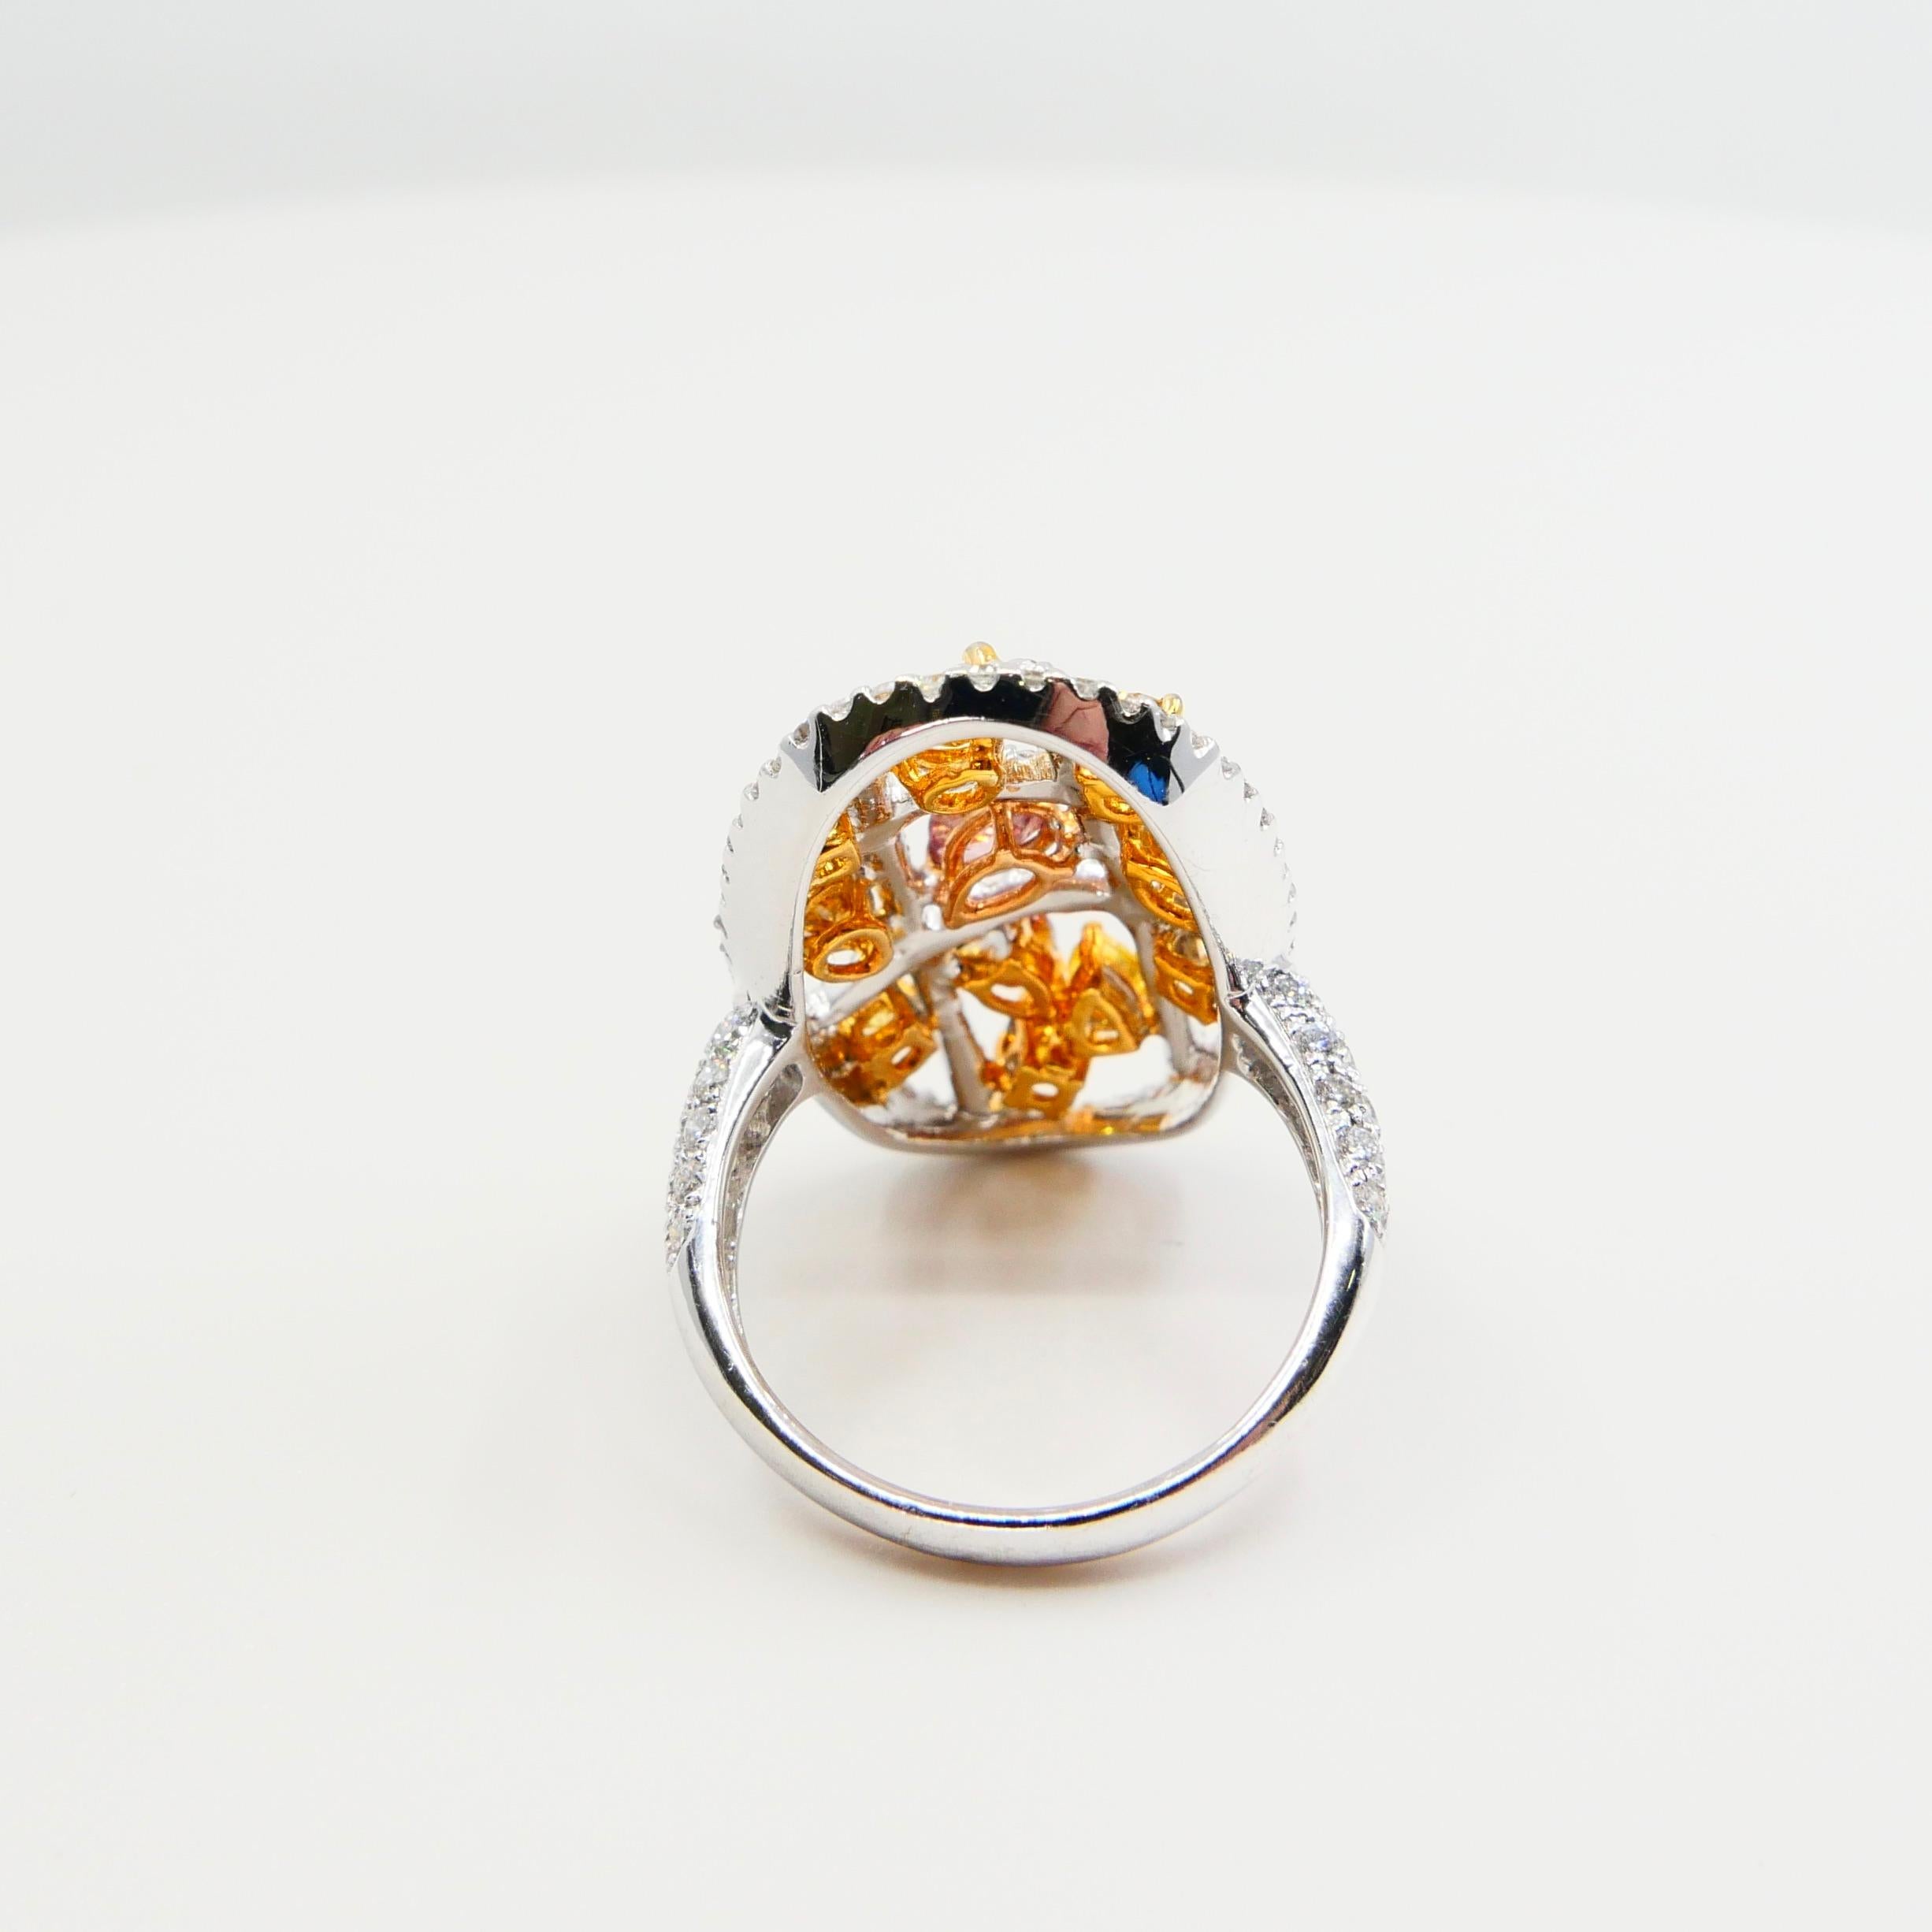 Contemporary Fancy Color, Fancy Shaped Multicolored Diamond Cocktail Ring, Statement Piece For Sale